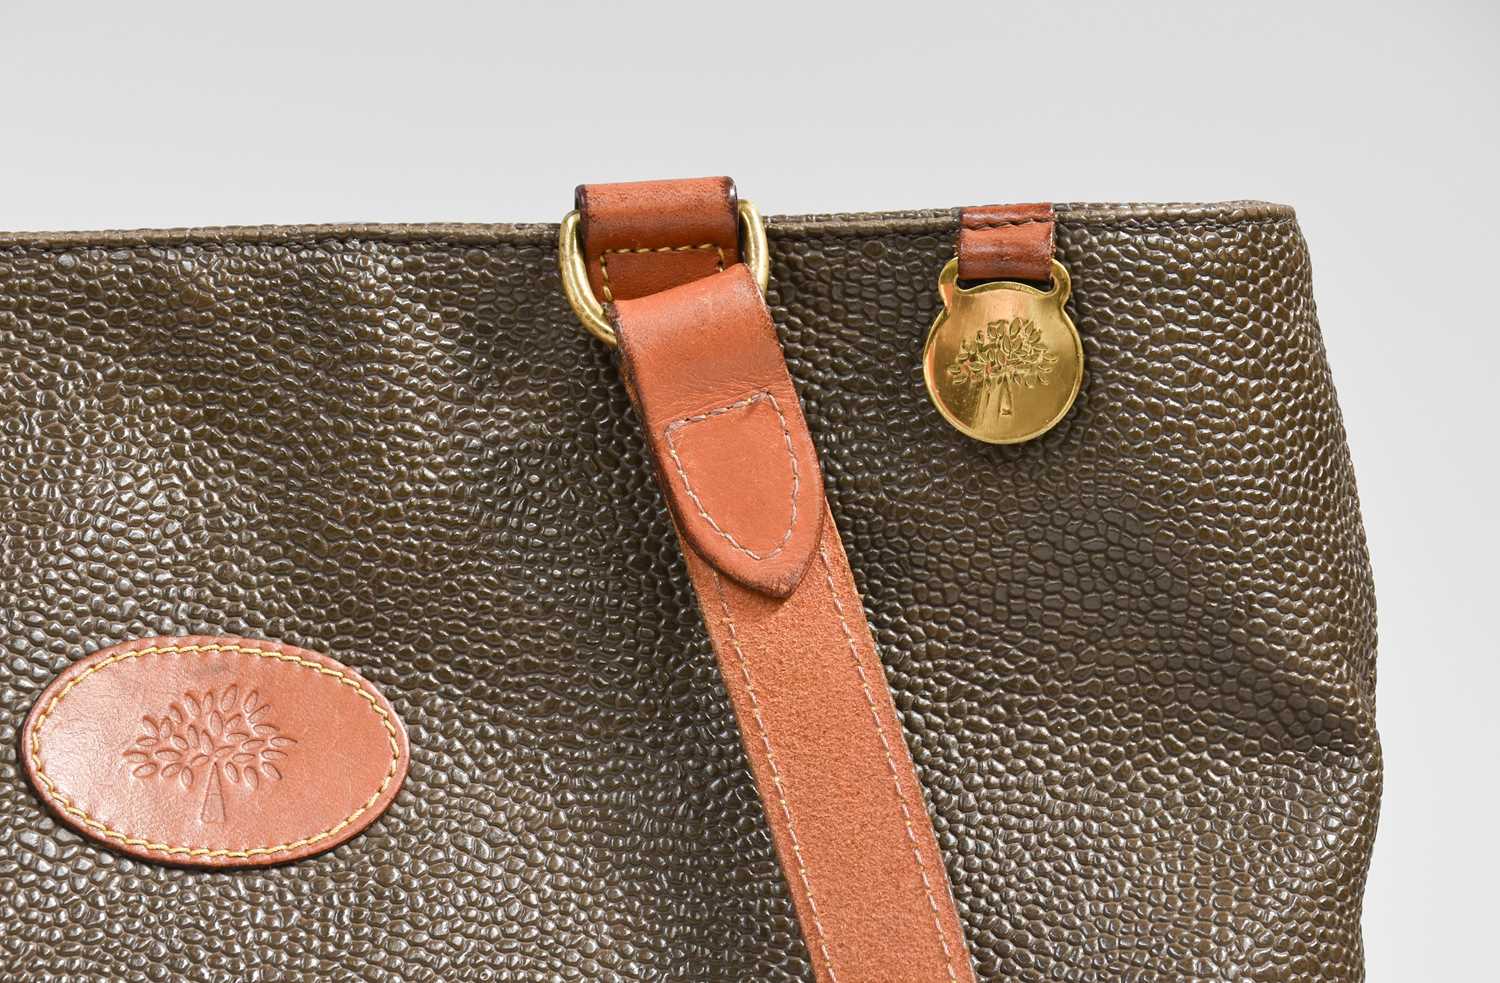 Mulberry Large Green Scotch Grain Leather Shoulder Bag, with leather straps and mounts, brass fob - Image 2 of 2